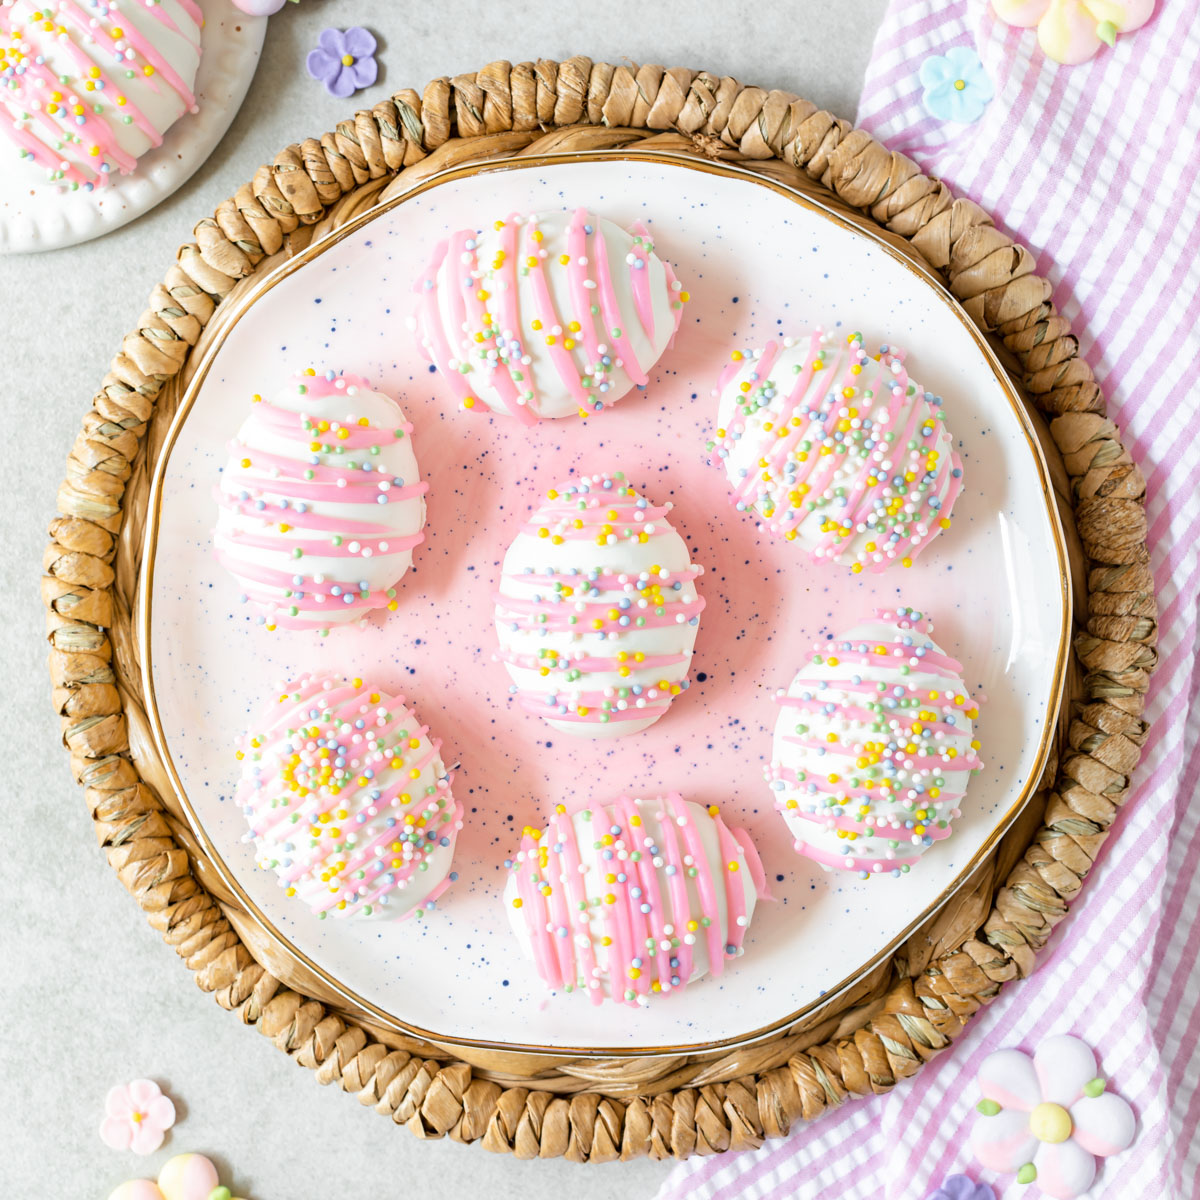 Festive Easter egg shaped Oreo balls with pink chocolate drizzle and sprinkles